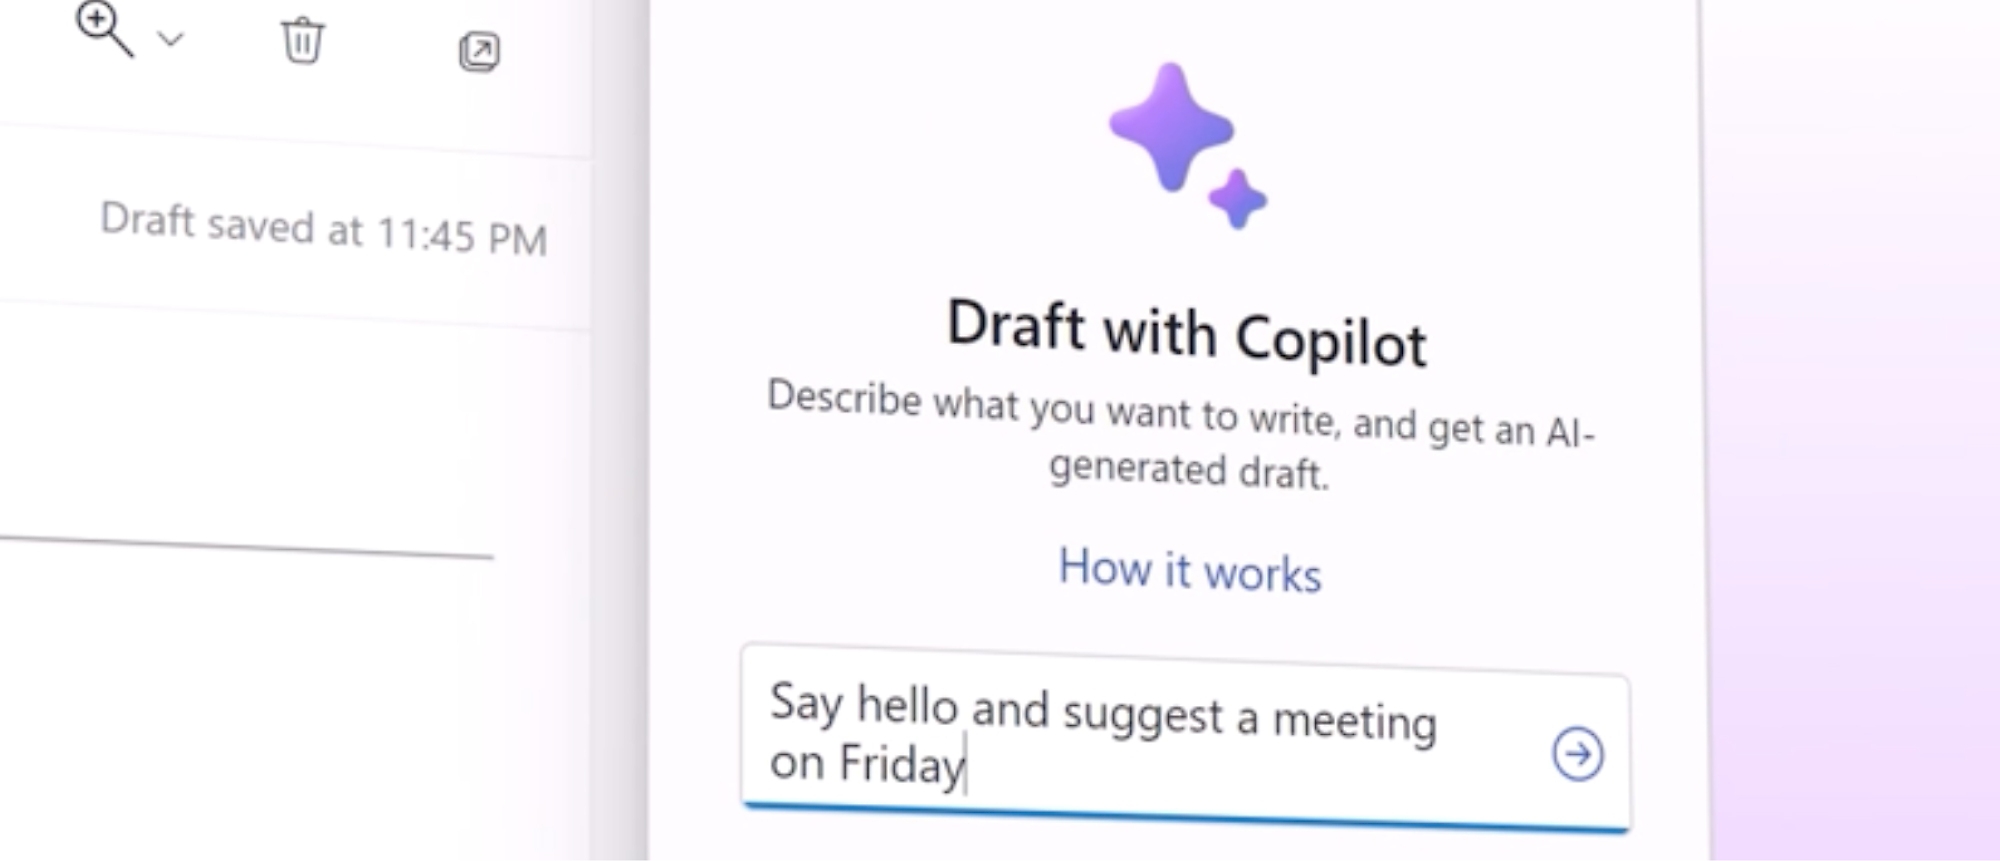 A screen showing Sales Copilot, and with a dialog box with the heading of "Draft with Copilot". The dialog box is receiving input from the user as to what the user wants Sales Copilot to draft